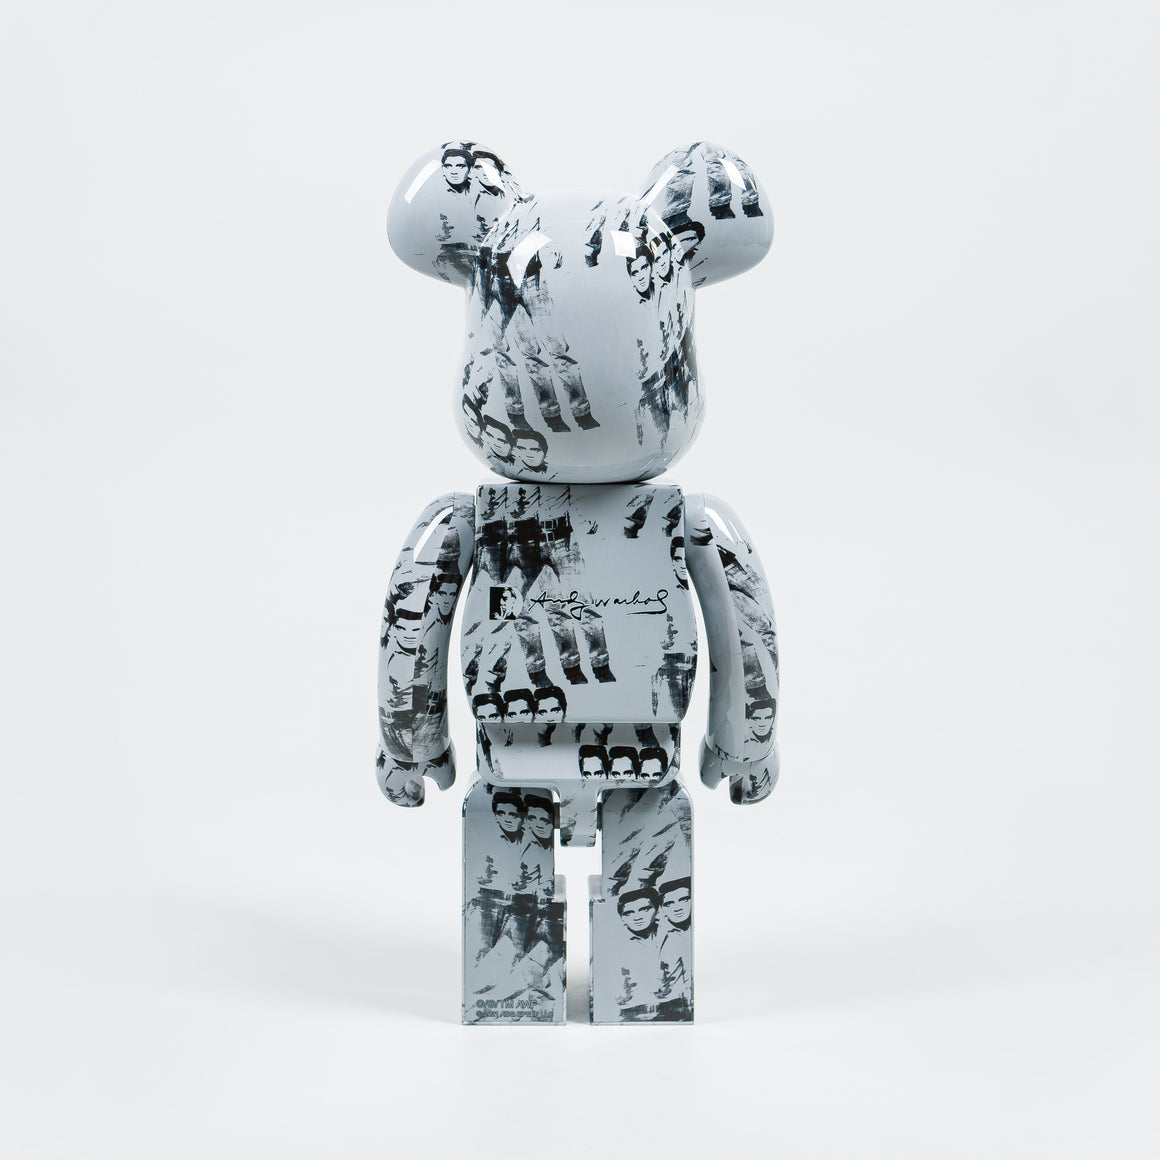 Medicom Toy - Be@rbrick x Andy Warhol 1000% - Elvis - UP THERE